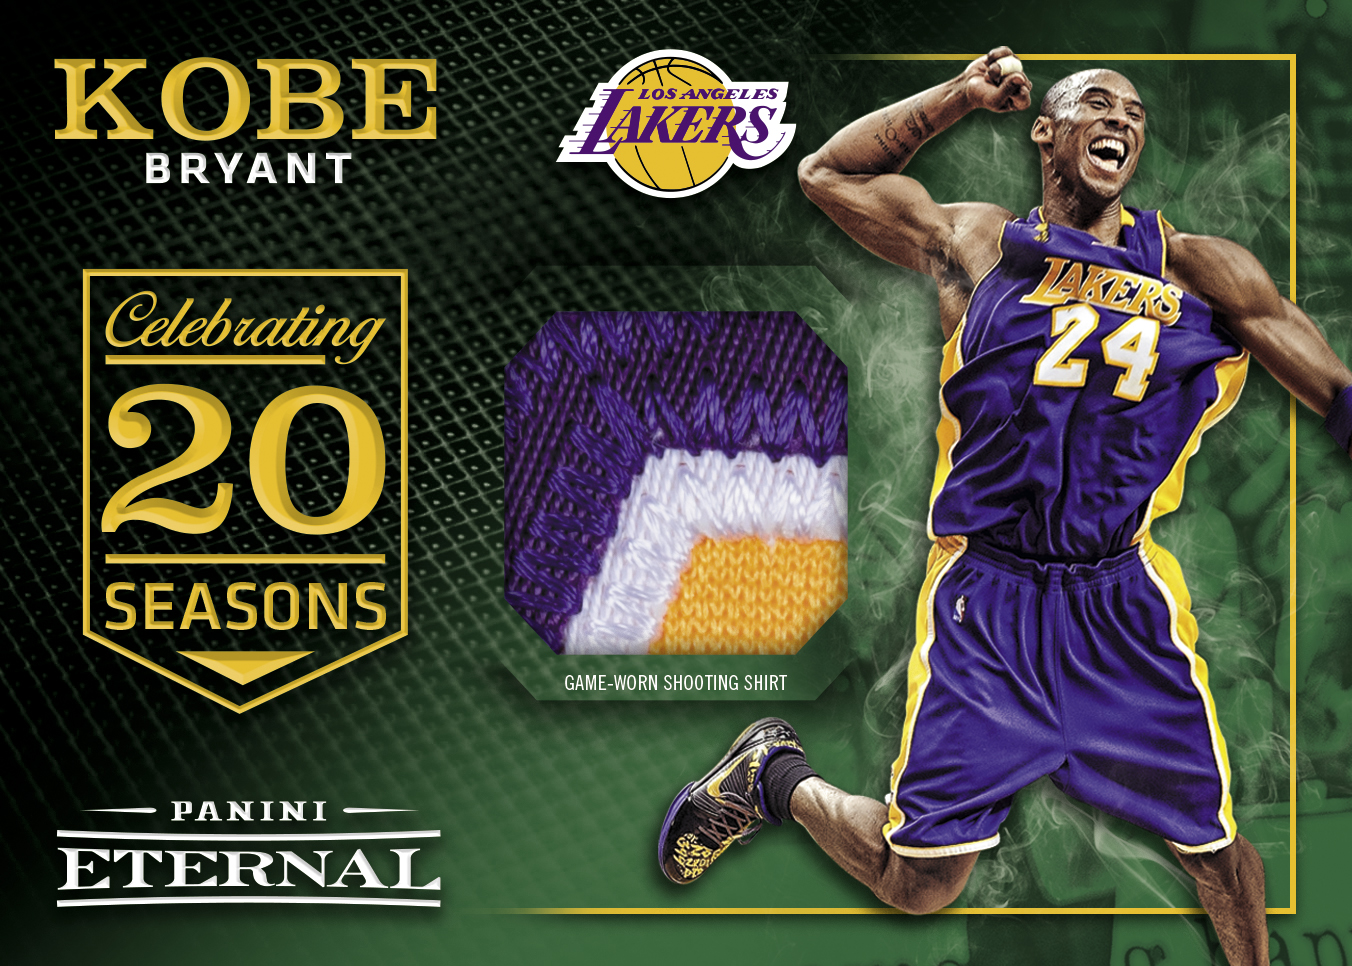 Now Available: Kobe's Game-Worn Shooting Shirt, Shaq in the HOF